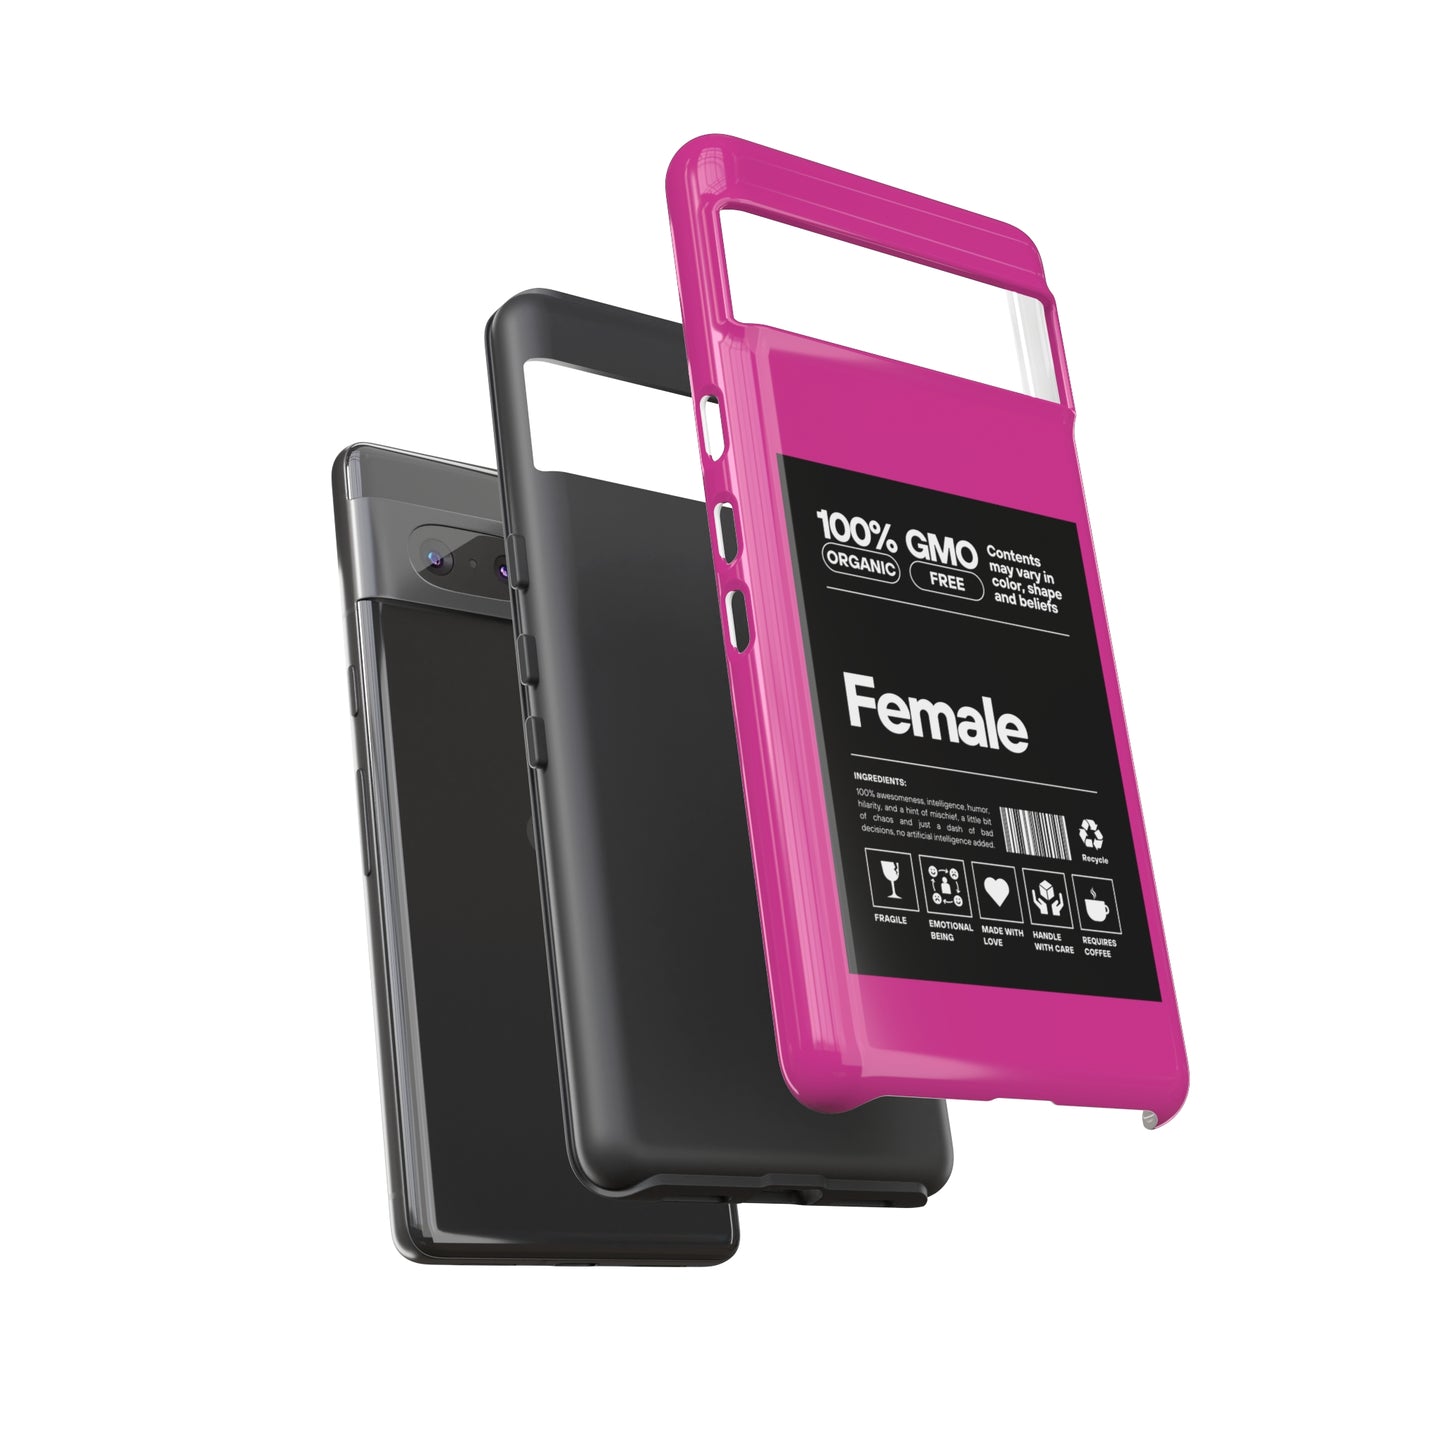 Female pink Tough Cases